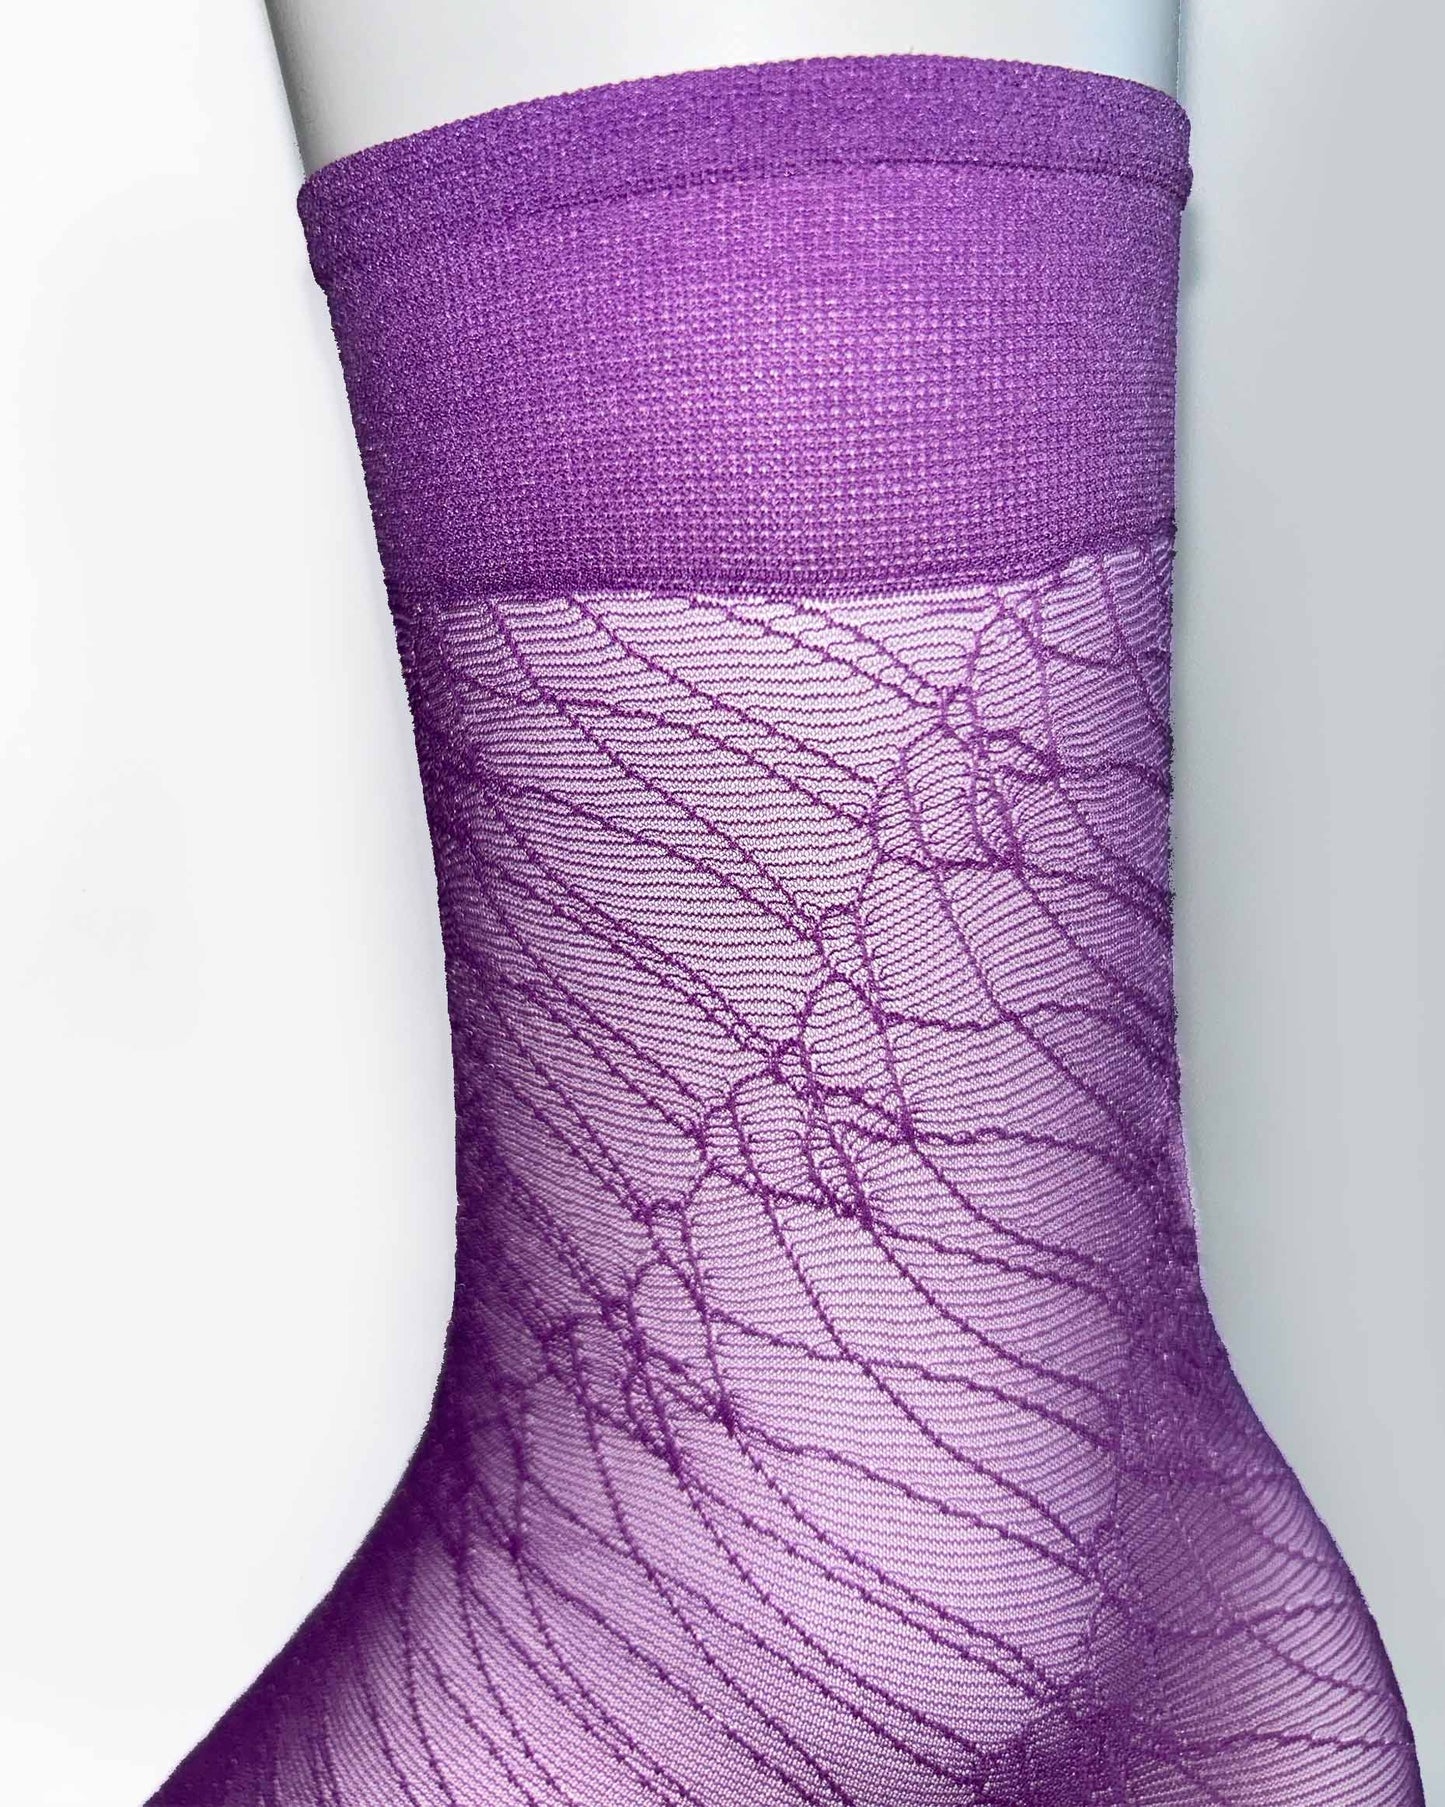 Omsa Grace Calzino - Sheer lilac purple fashion ankle socks with an all over messy scribbly linear style pattern and deep comfort cuff.